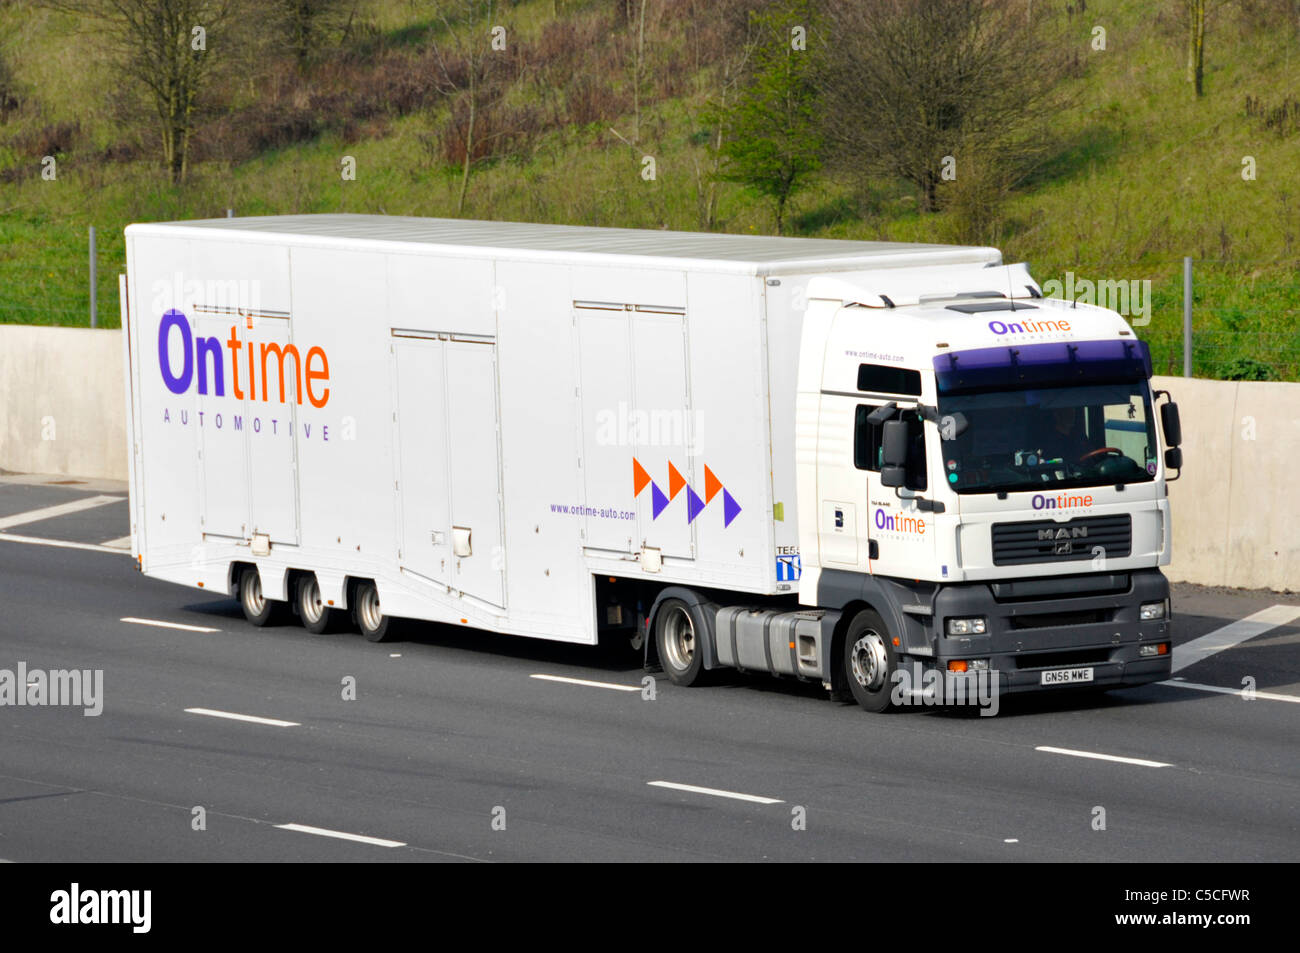 Front & side view of Ontime Automotive enclosed car delivery transport business hgv lorry truck & trailer with company logo driving on UK motorway Stock Photo